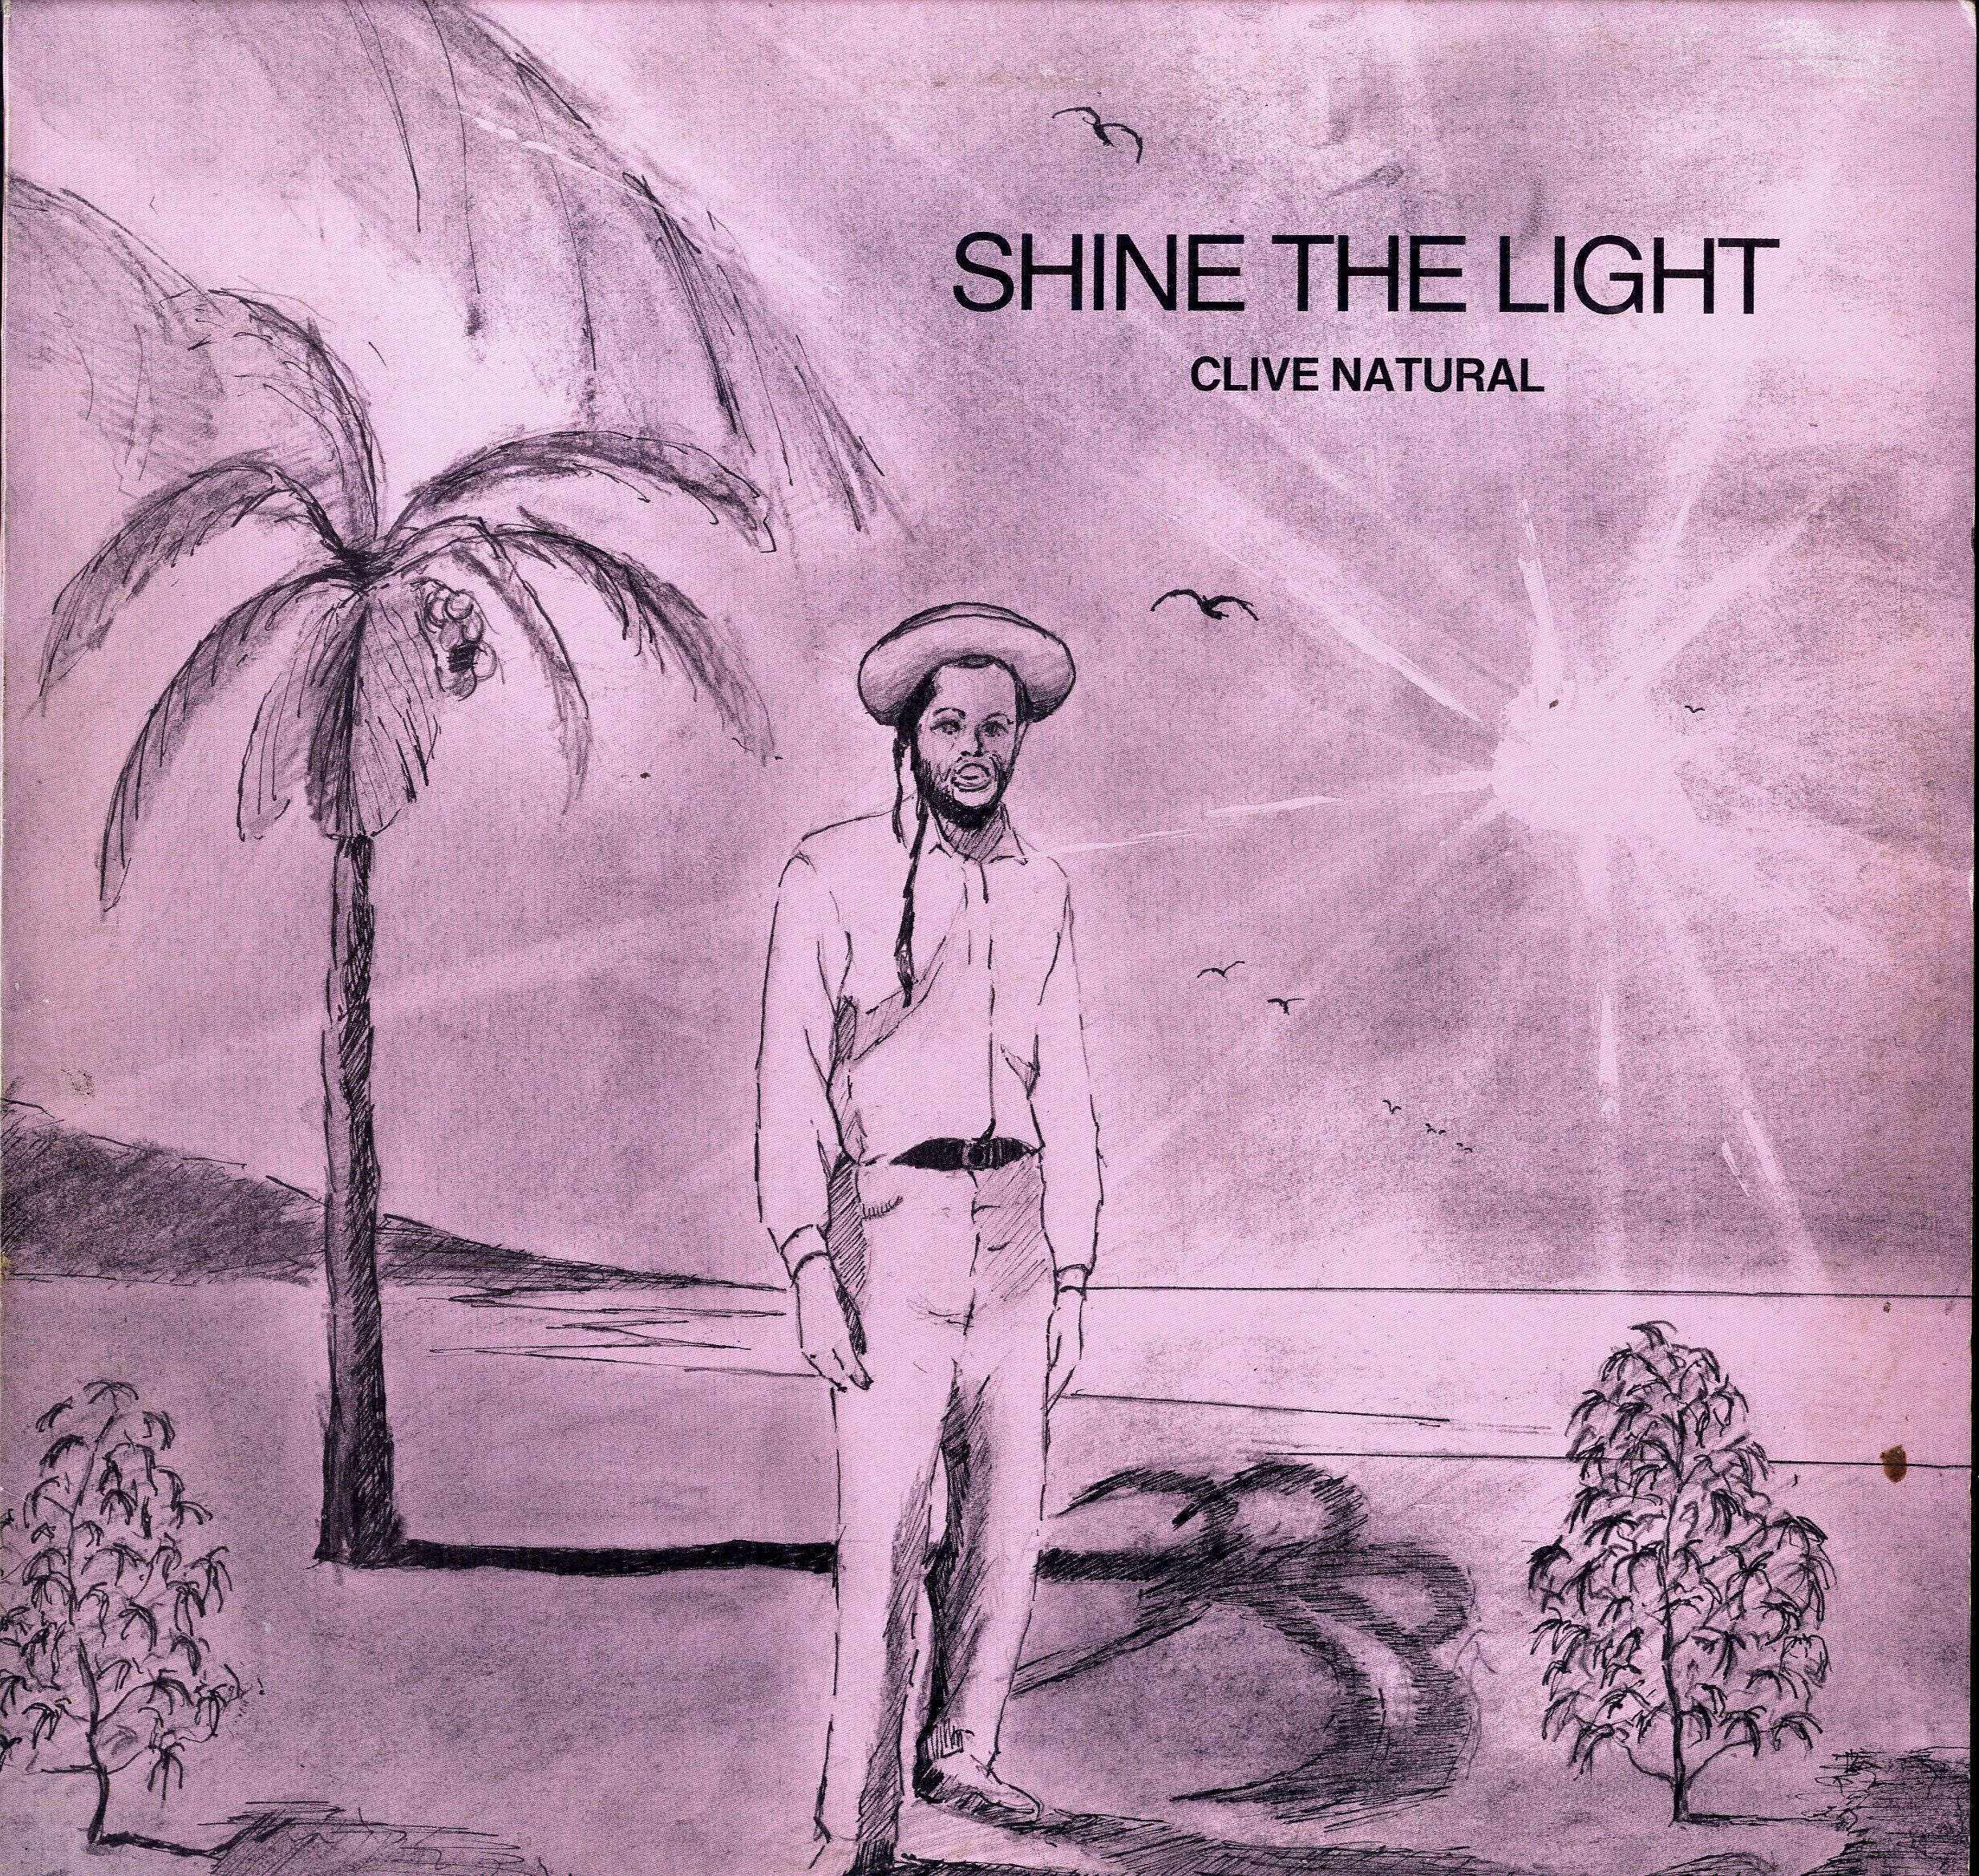 CLIVE NATURAL [Shine The Light]